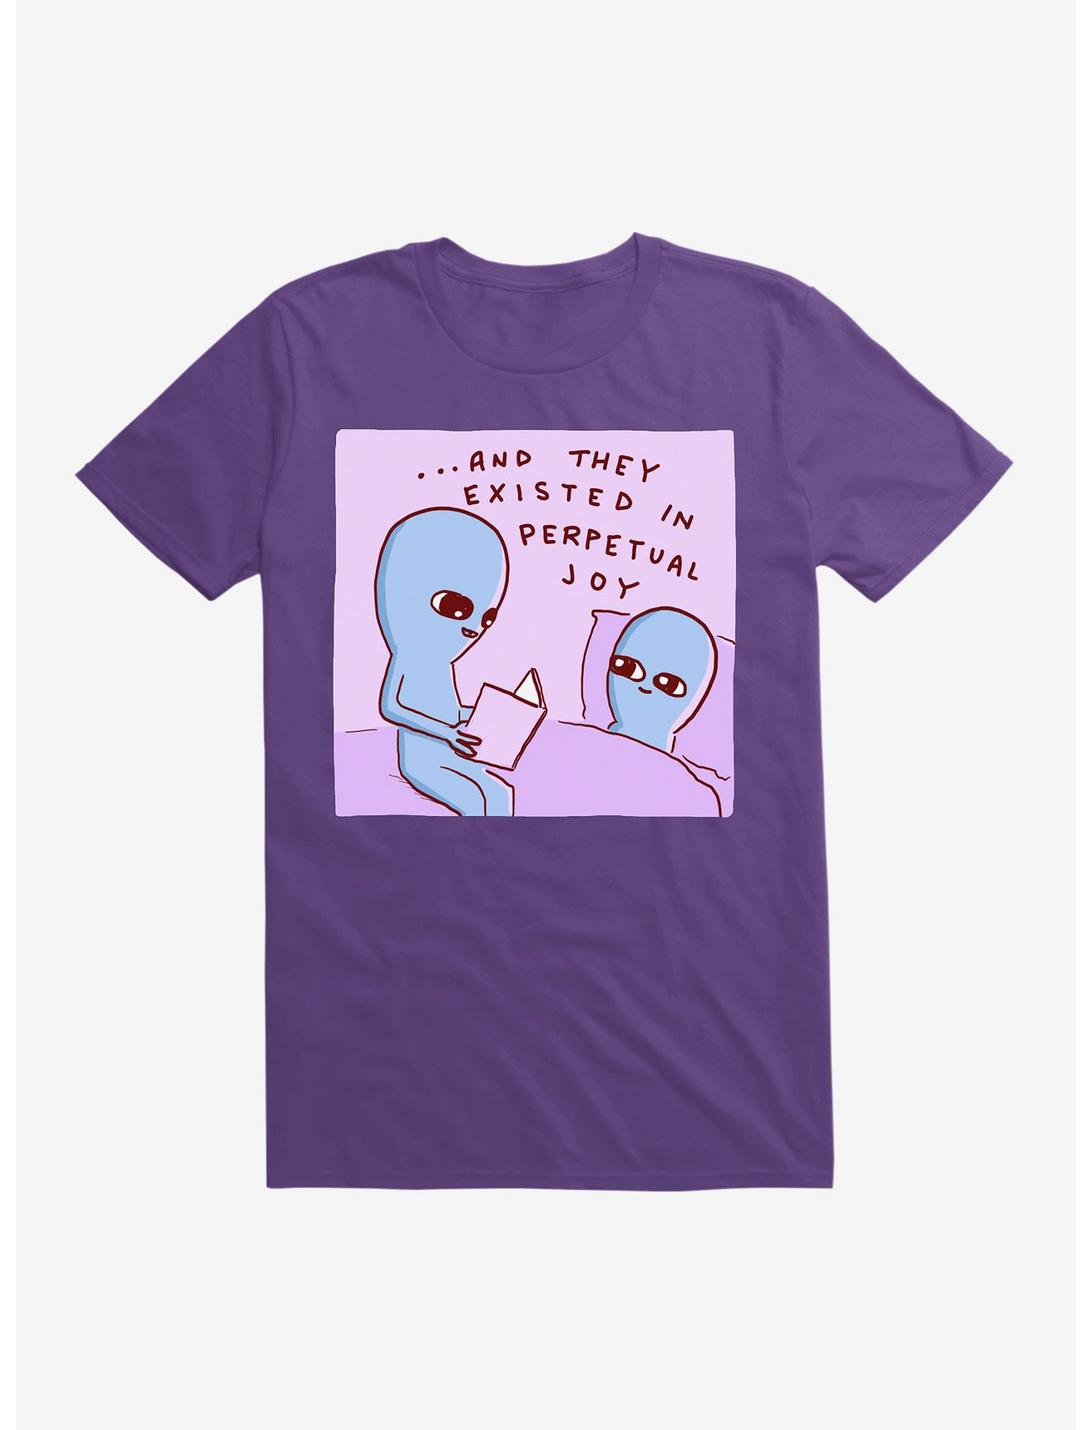 Strange Planet And They Existed In Perpetual Joy T-Shirt, PURPLE, hi-res